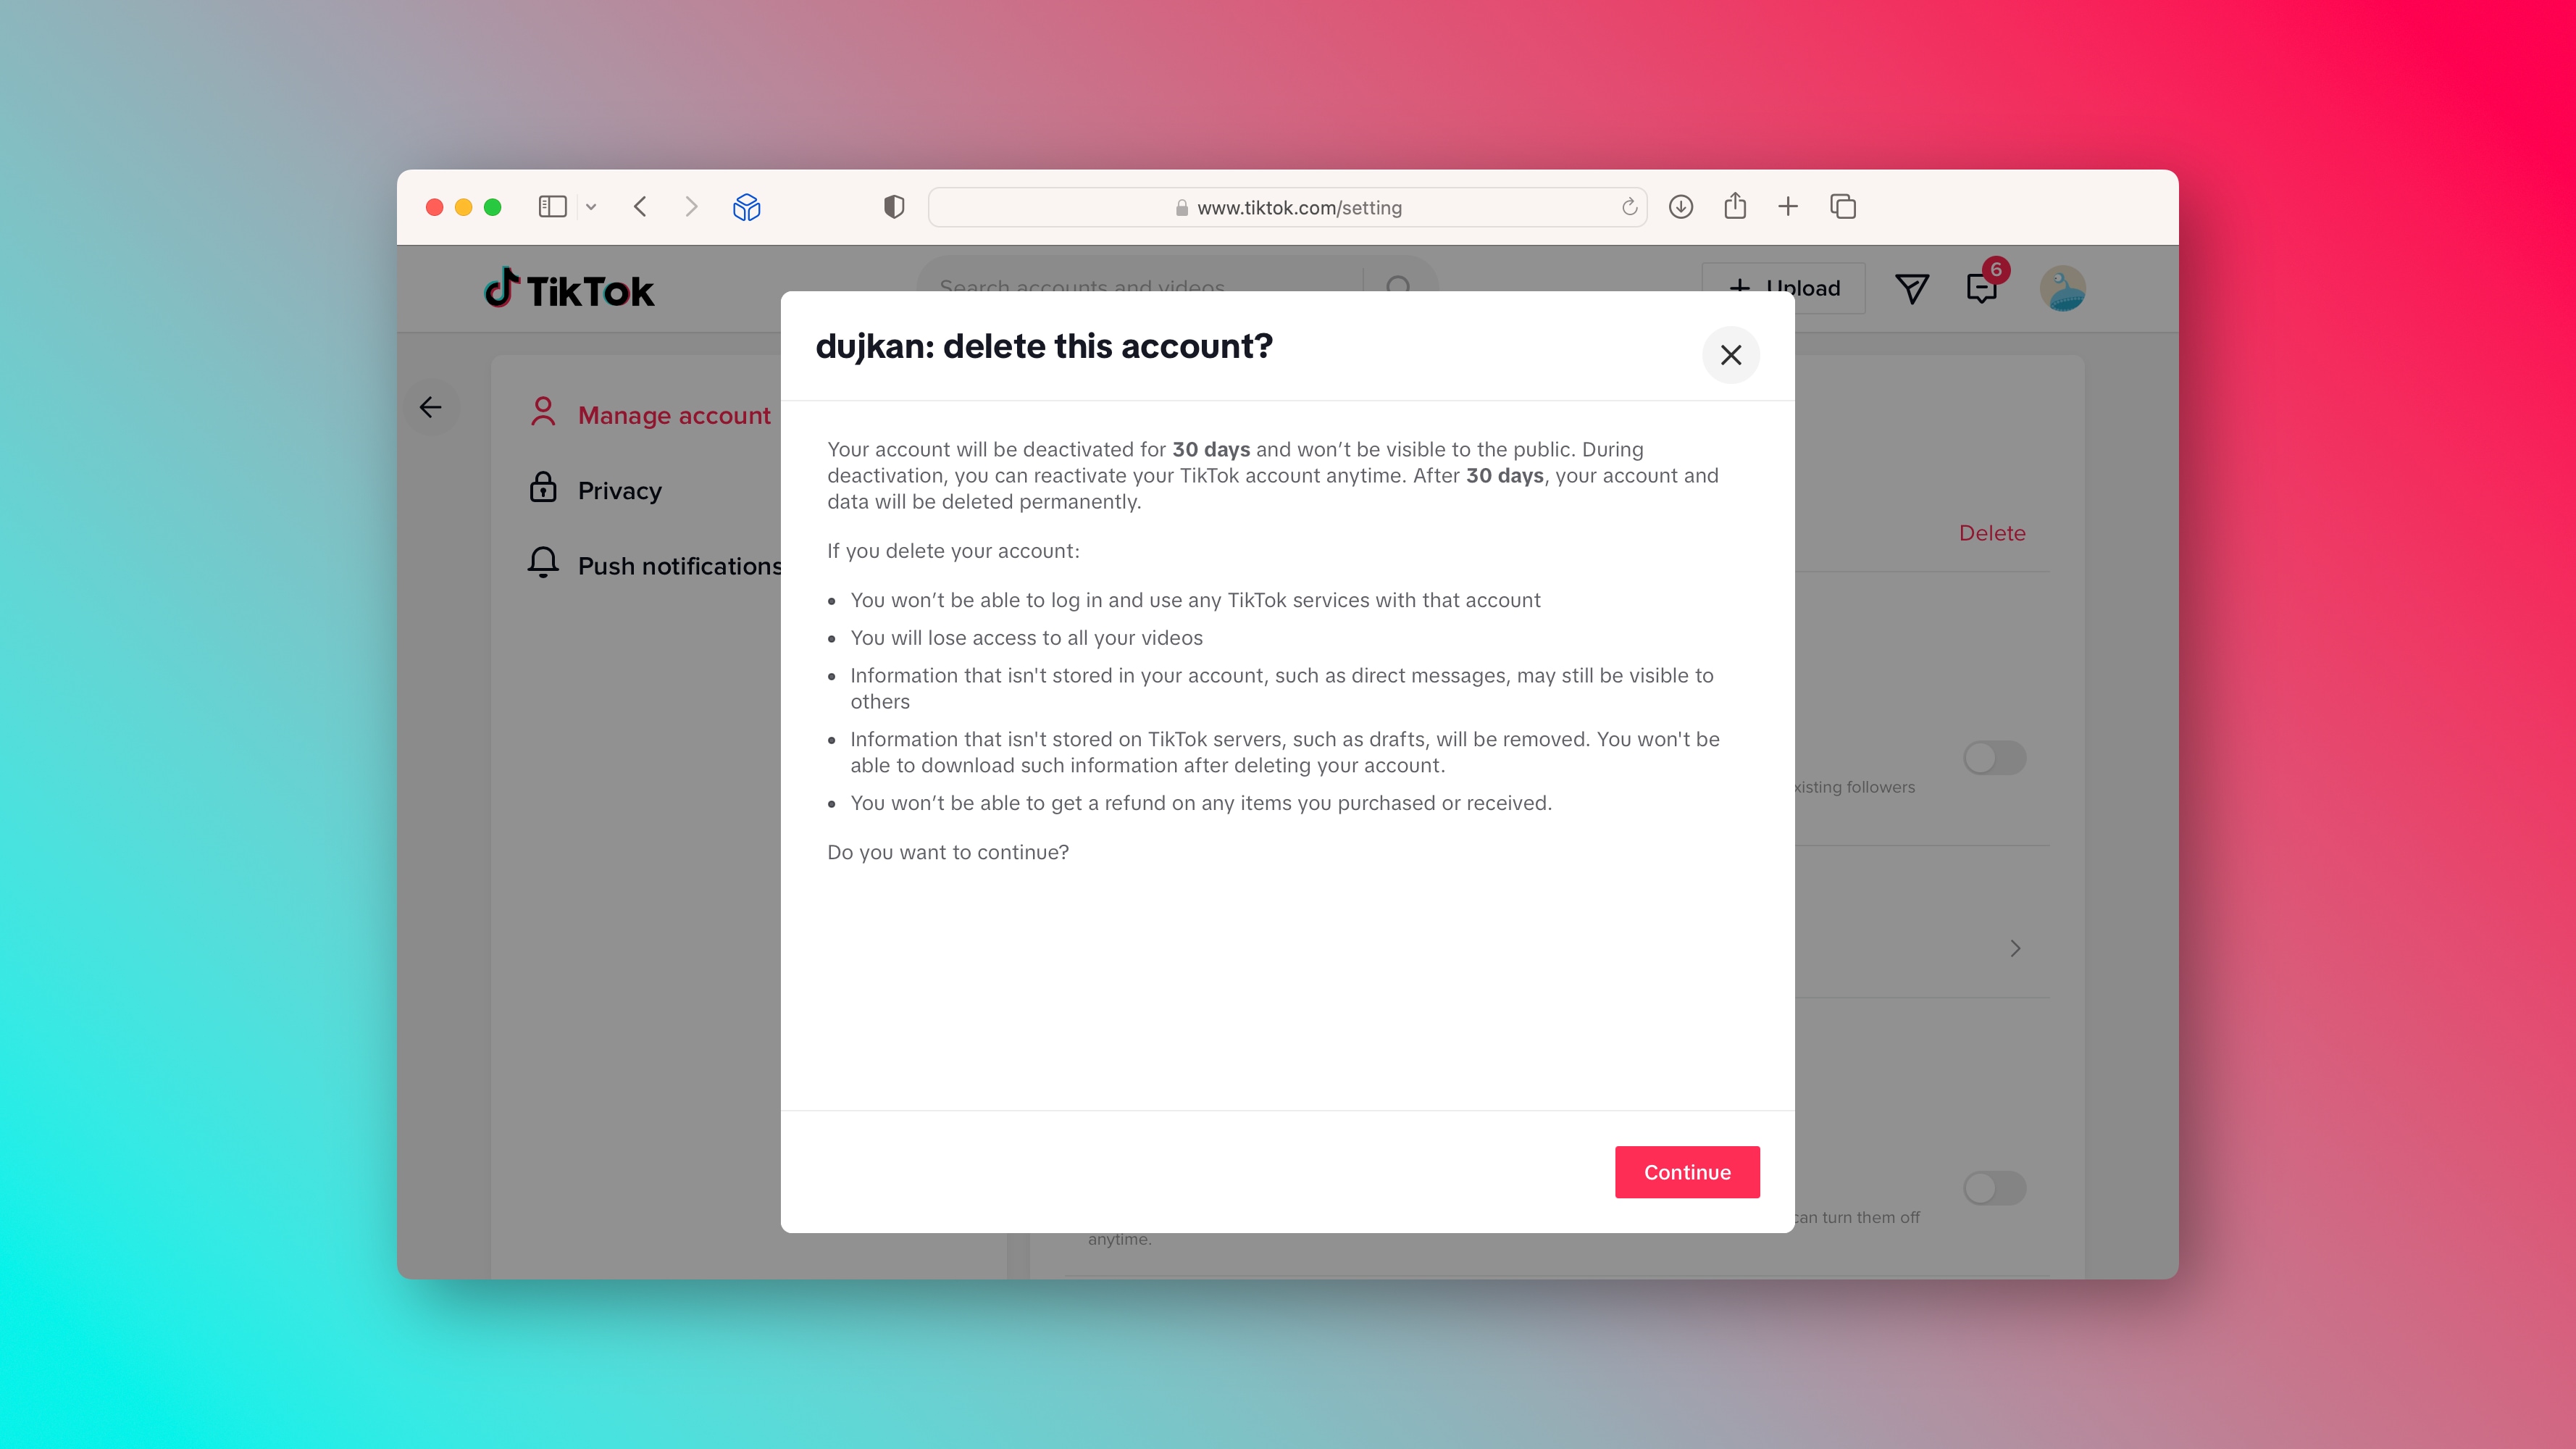 A prompt in TikTok's web interface asking the user to confirm account deletion